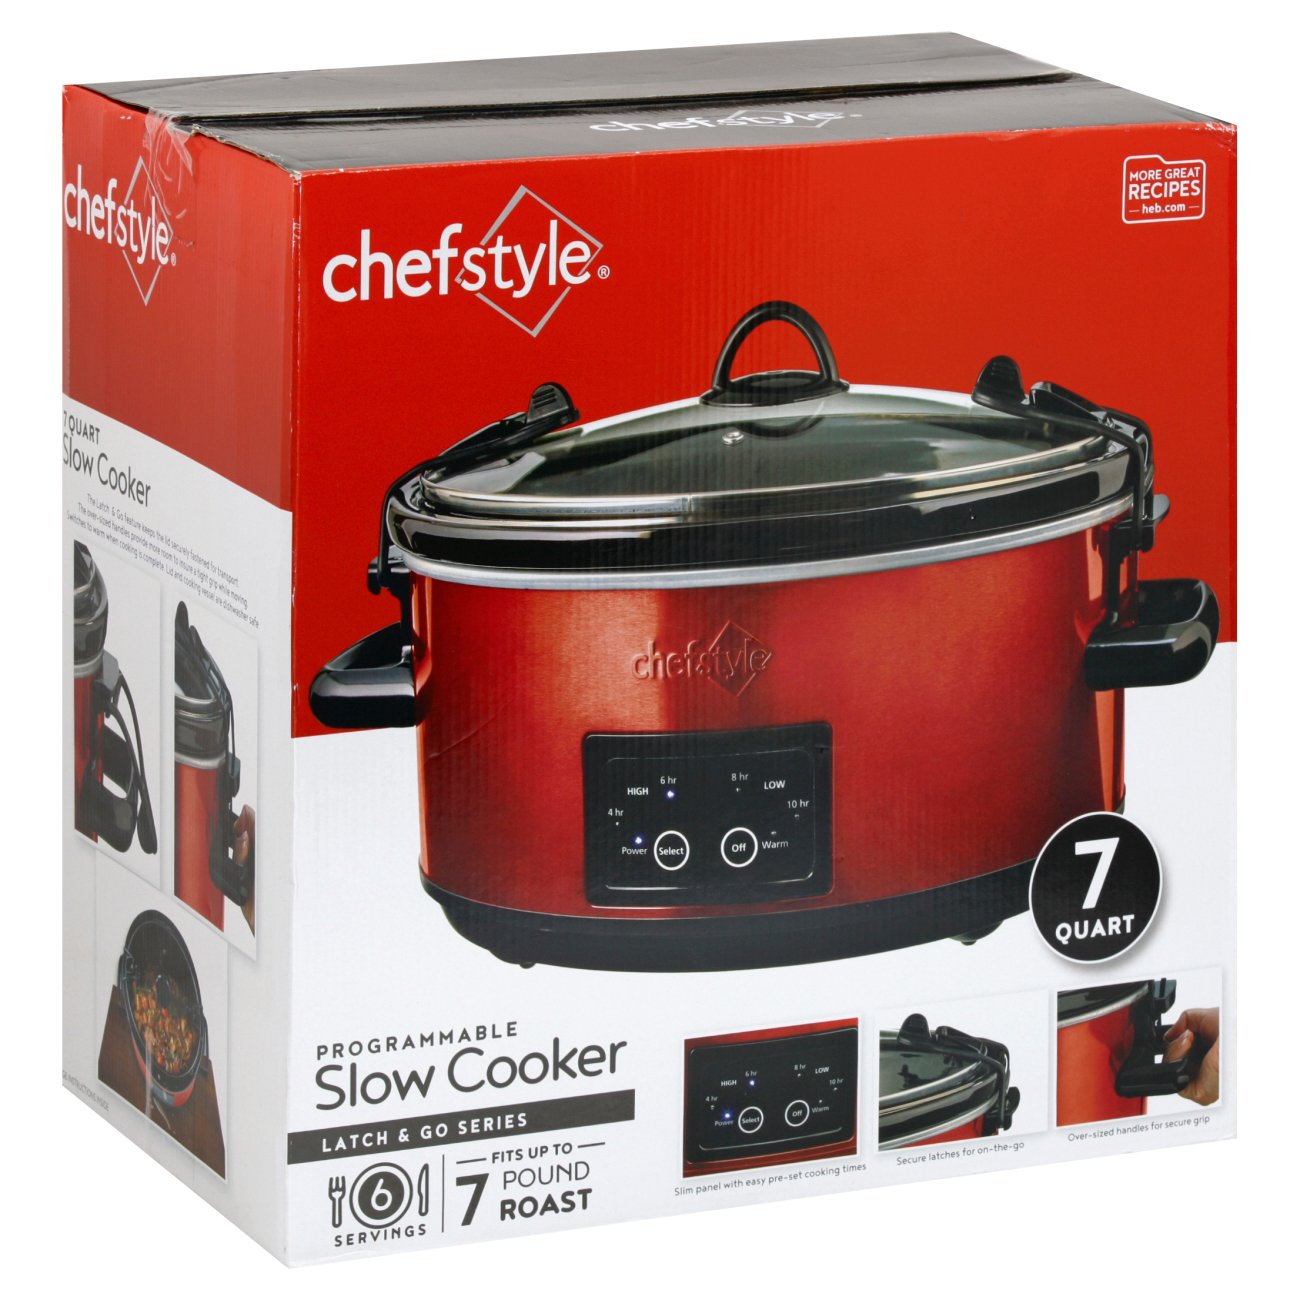 Crock-Pot 7 Qt Food Slow Cooker Home Cooking Kitchen Appliance, Red (Open  Box)